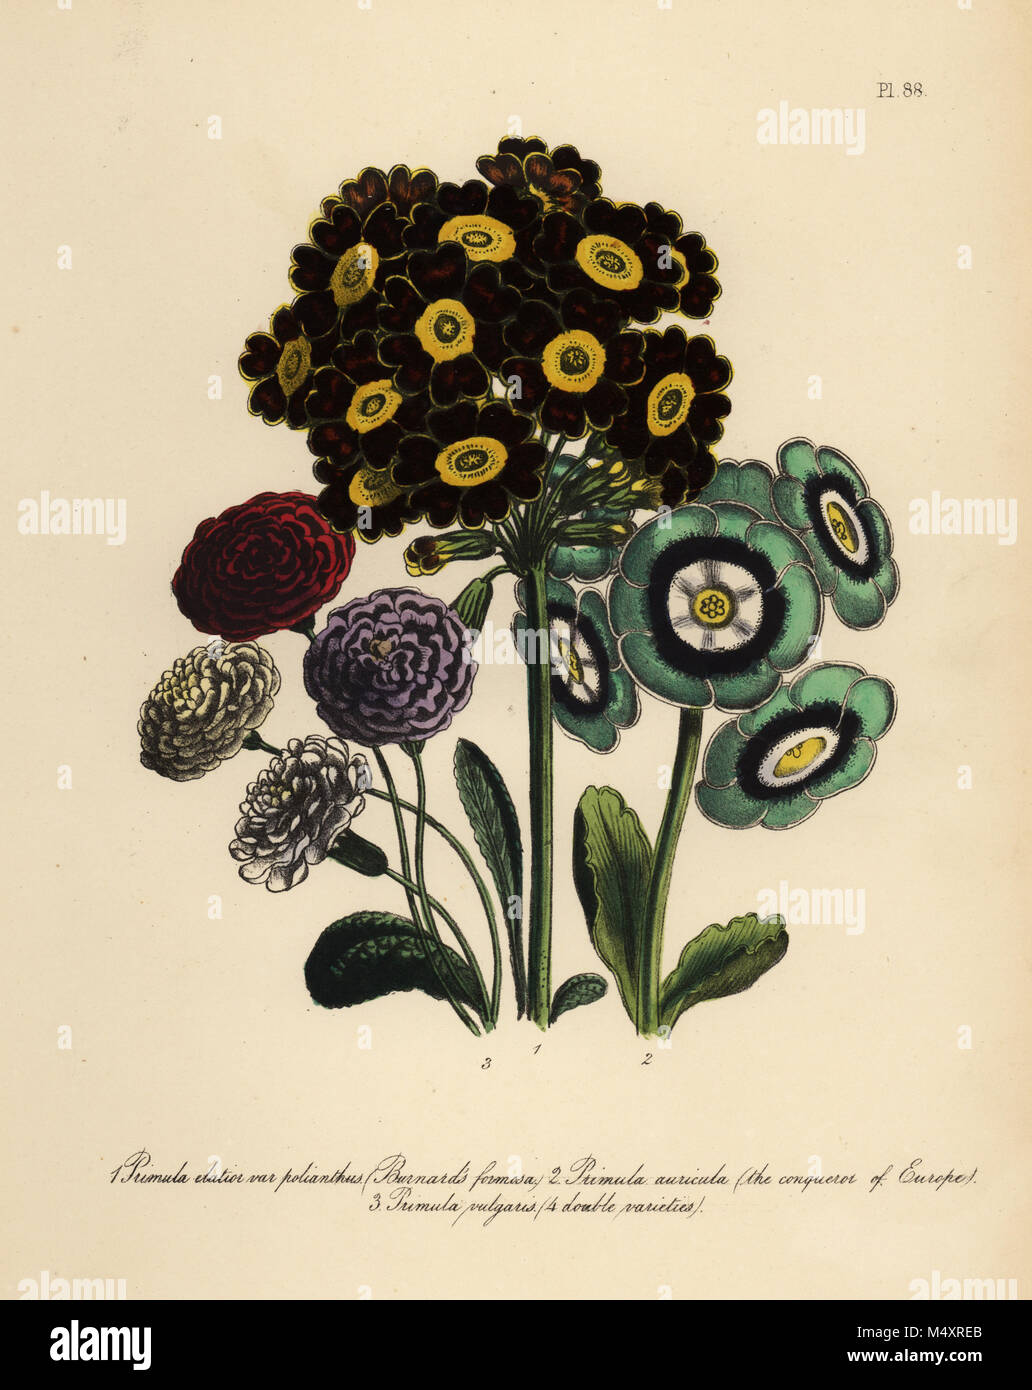 Burnard's formosa, Primula elatior polyanthus, Conqueror of Europe auricula, Primula auricula, and common primrose, Primula vulgaris.  Handfinished chromolithograph by Henry Noel Humphreys after an illustration by Jane Loudon from Mrs. Jane Loudon's Ladies Flower Garden of Ornamental Perennials, William S. Orr, London, 1849. Stock Photo